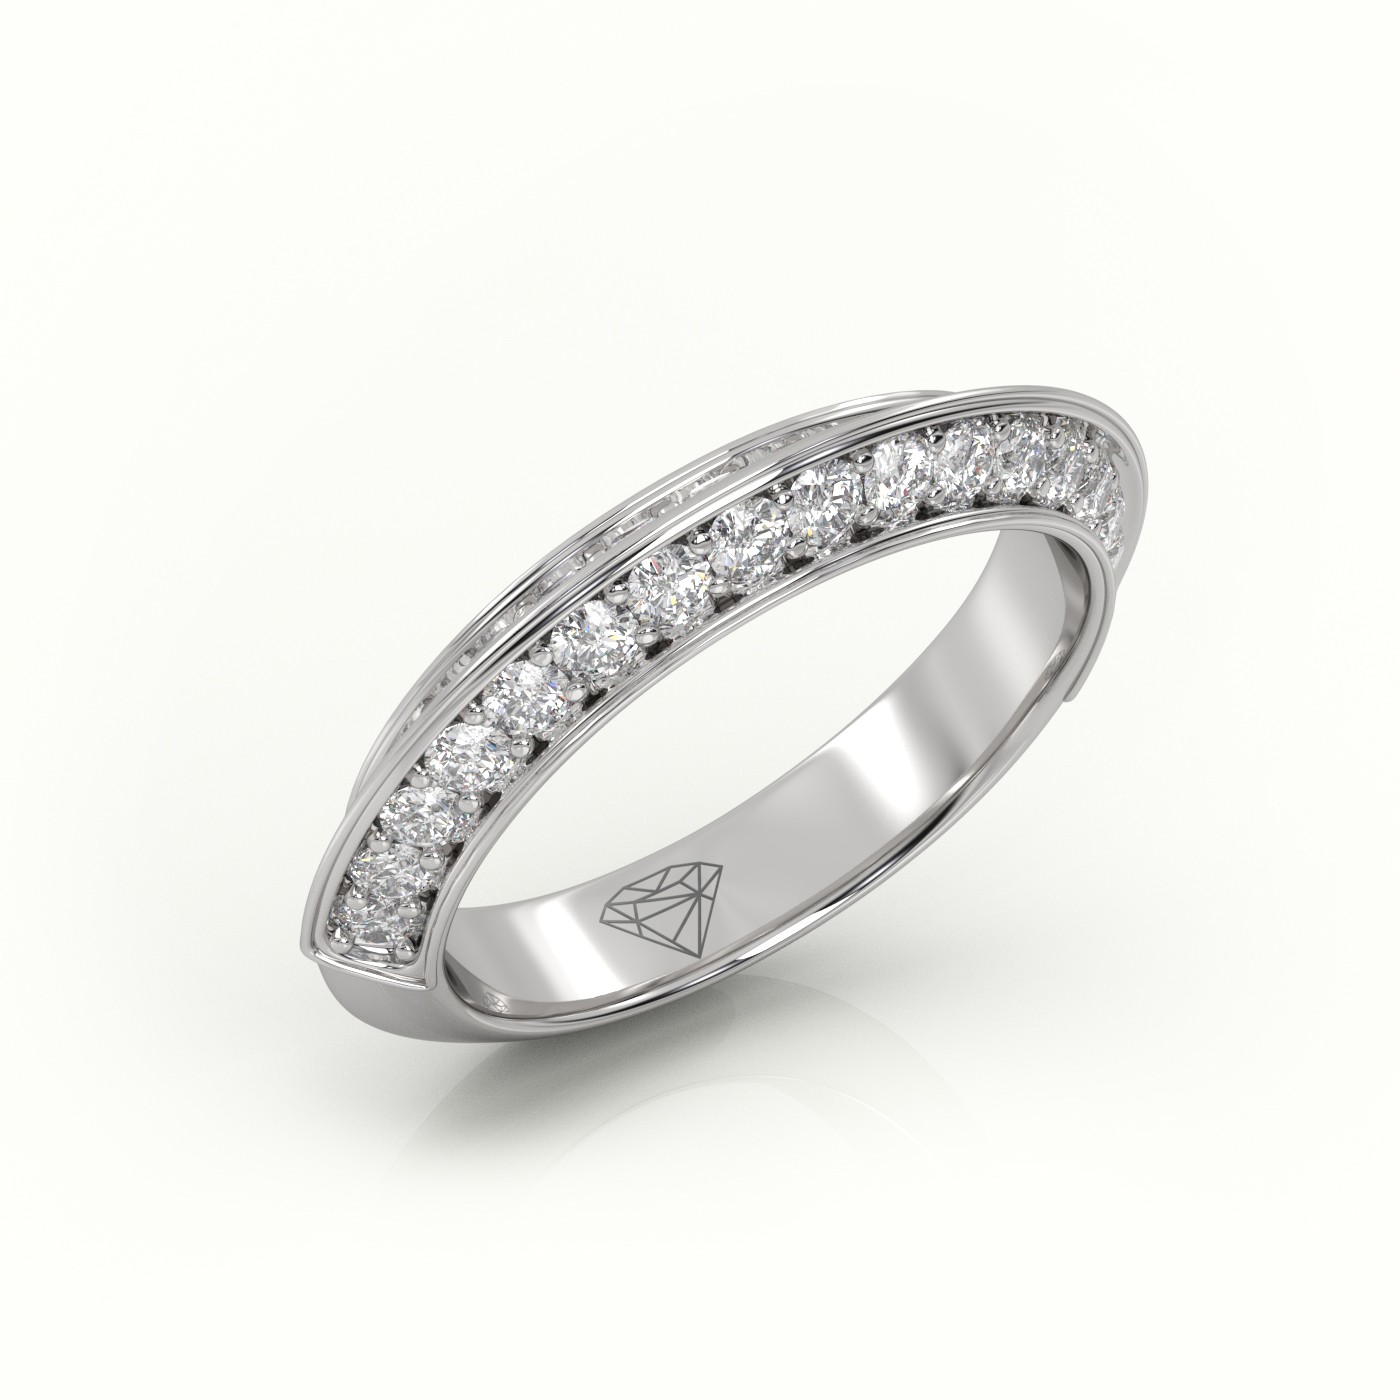 18k white gold  round cut diamond double channel setting eternity wedding band Photos & images